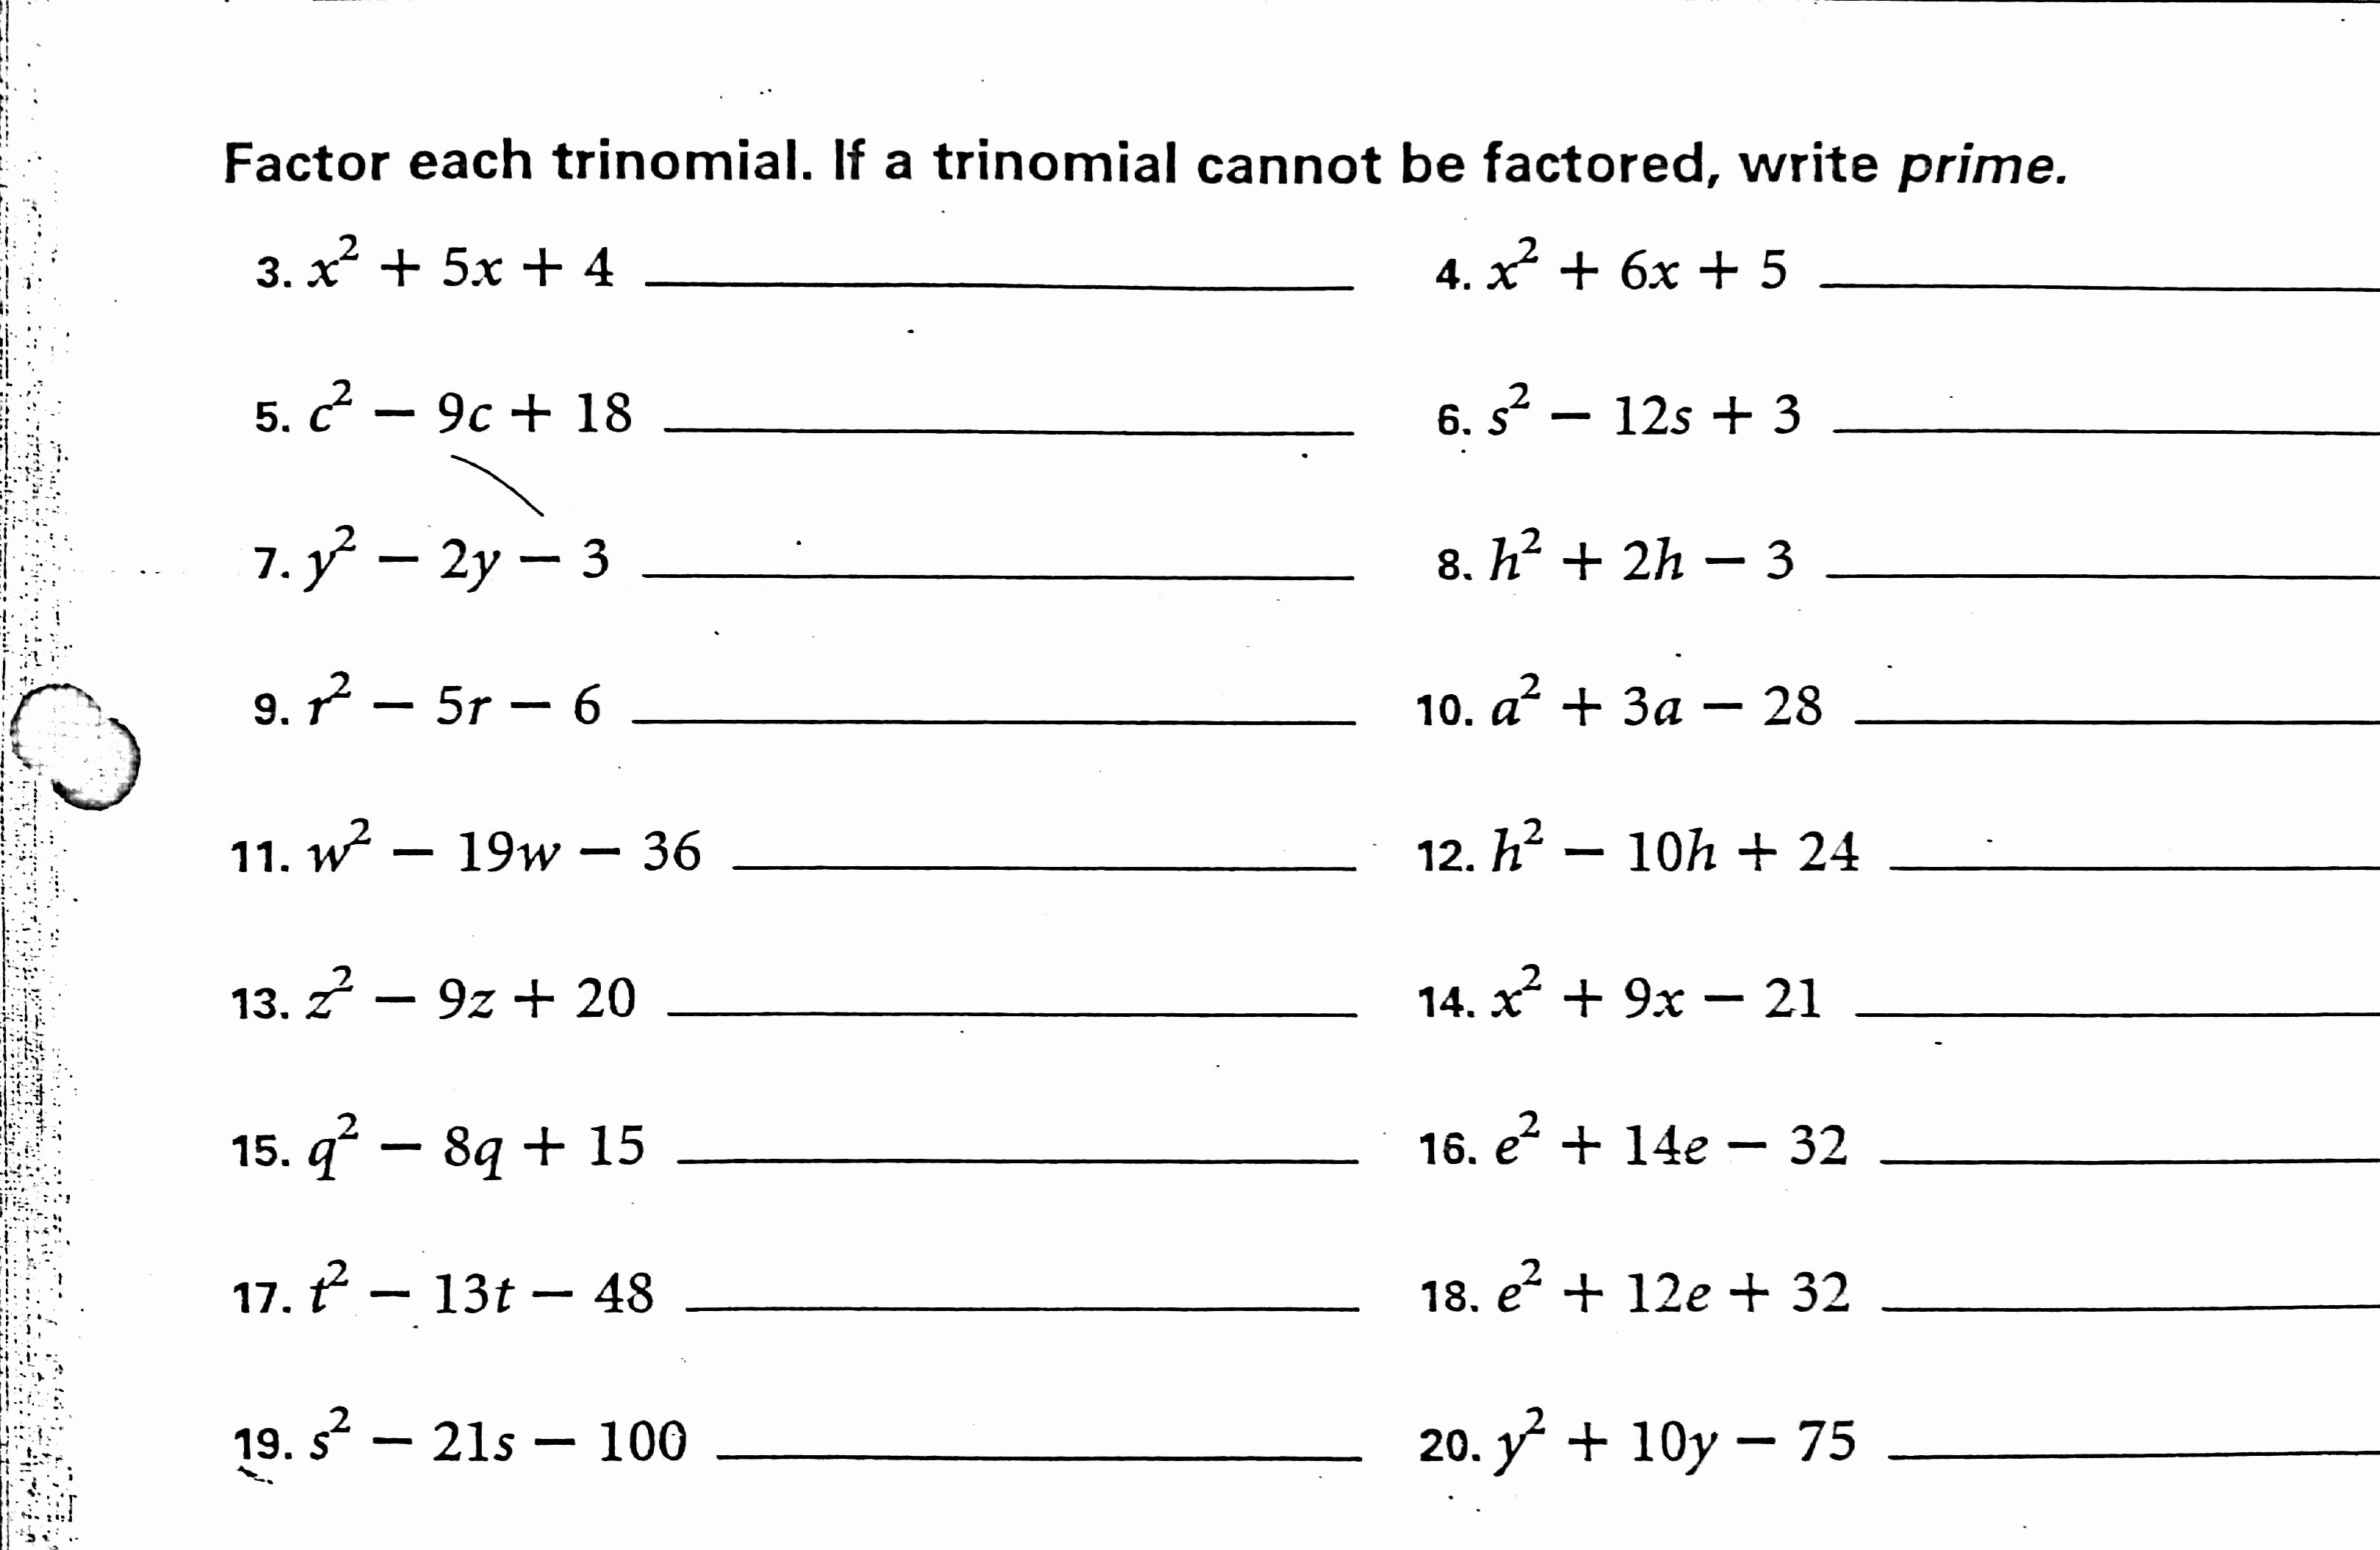 Factoring Polynomials Worksheet Answers Elegant 44 Algebra Worksheet Section 10 5 Factoring Polynomials